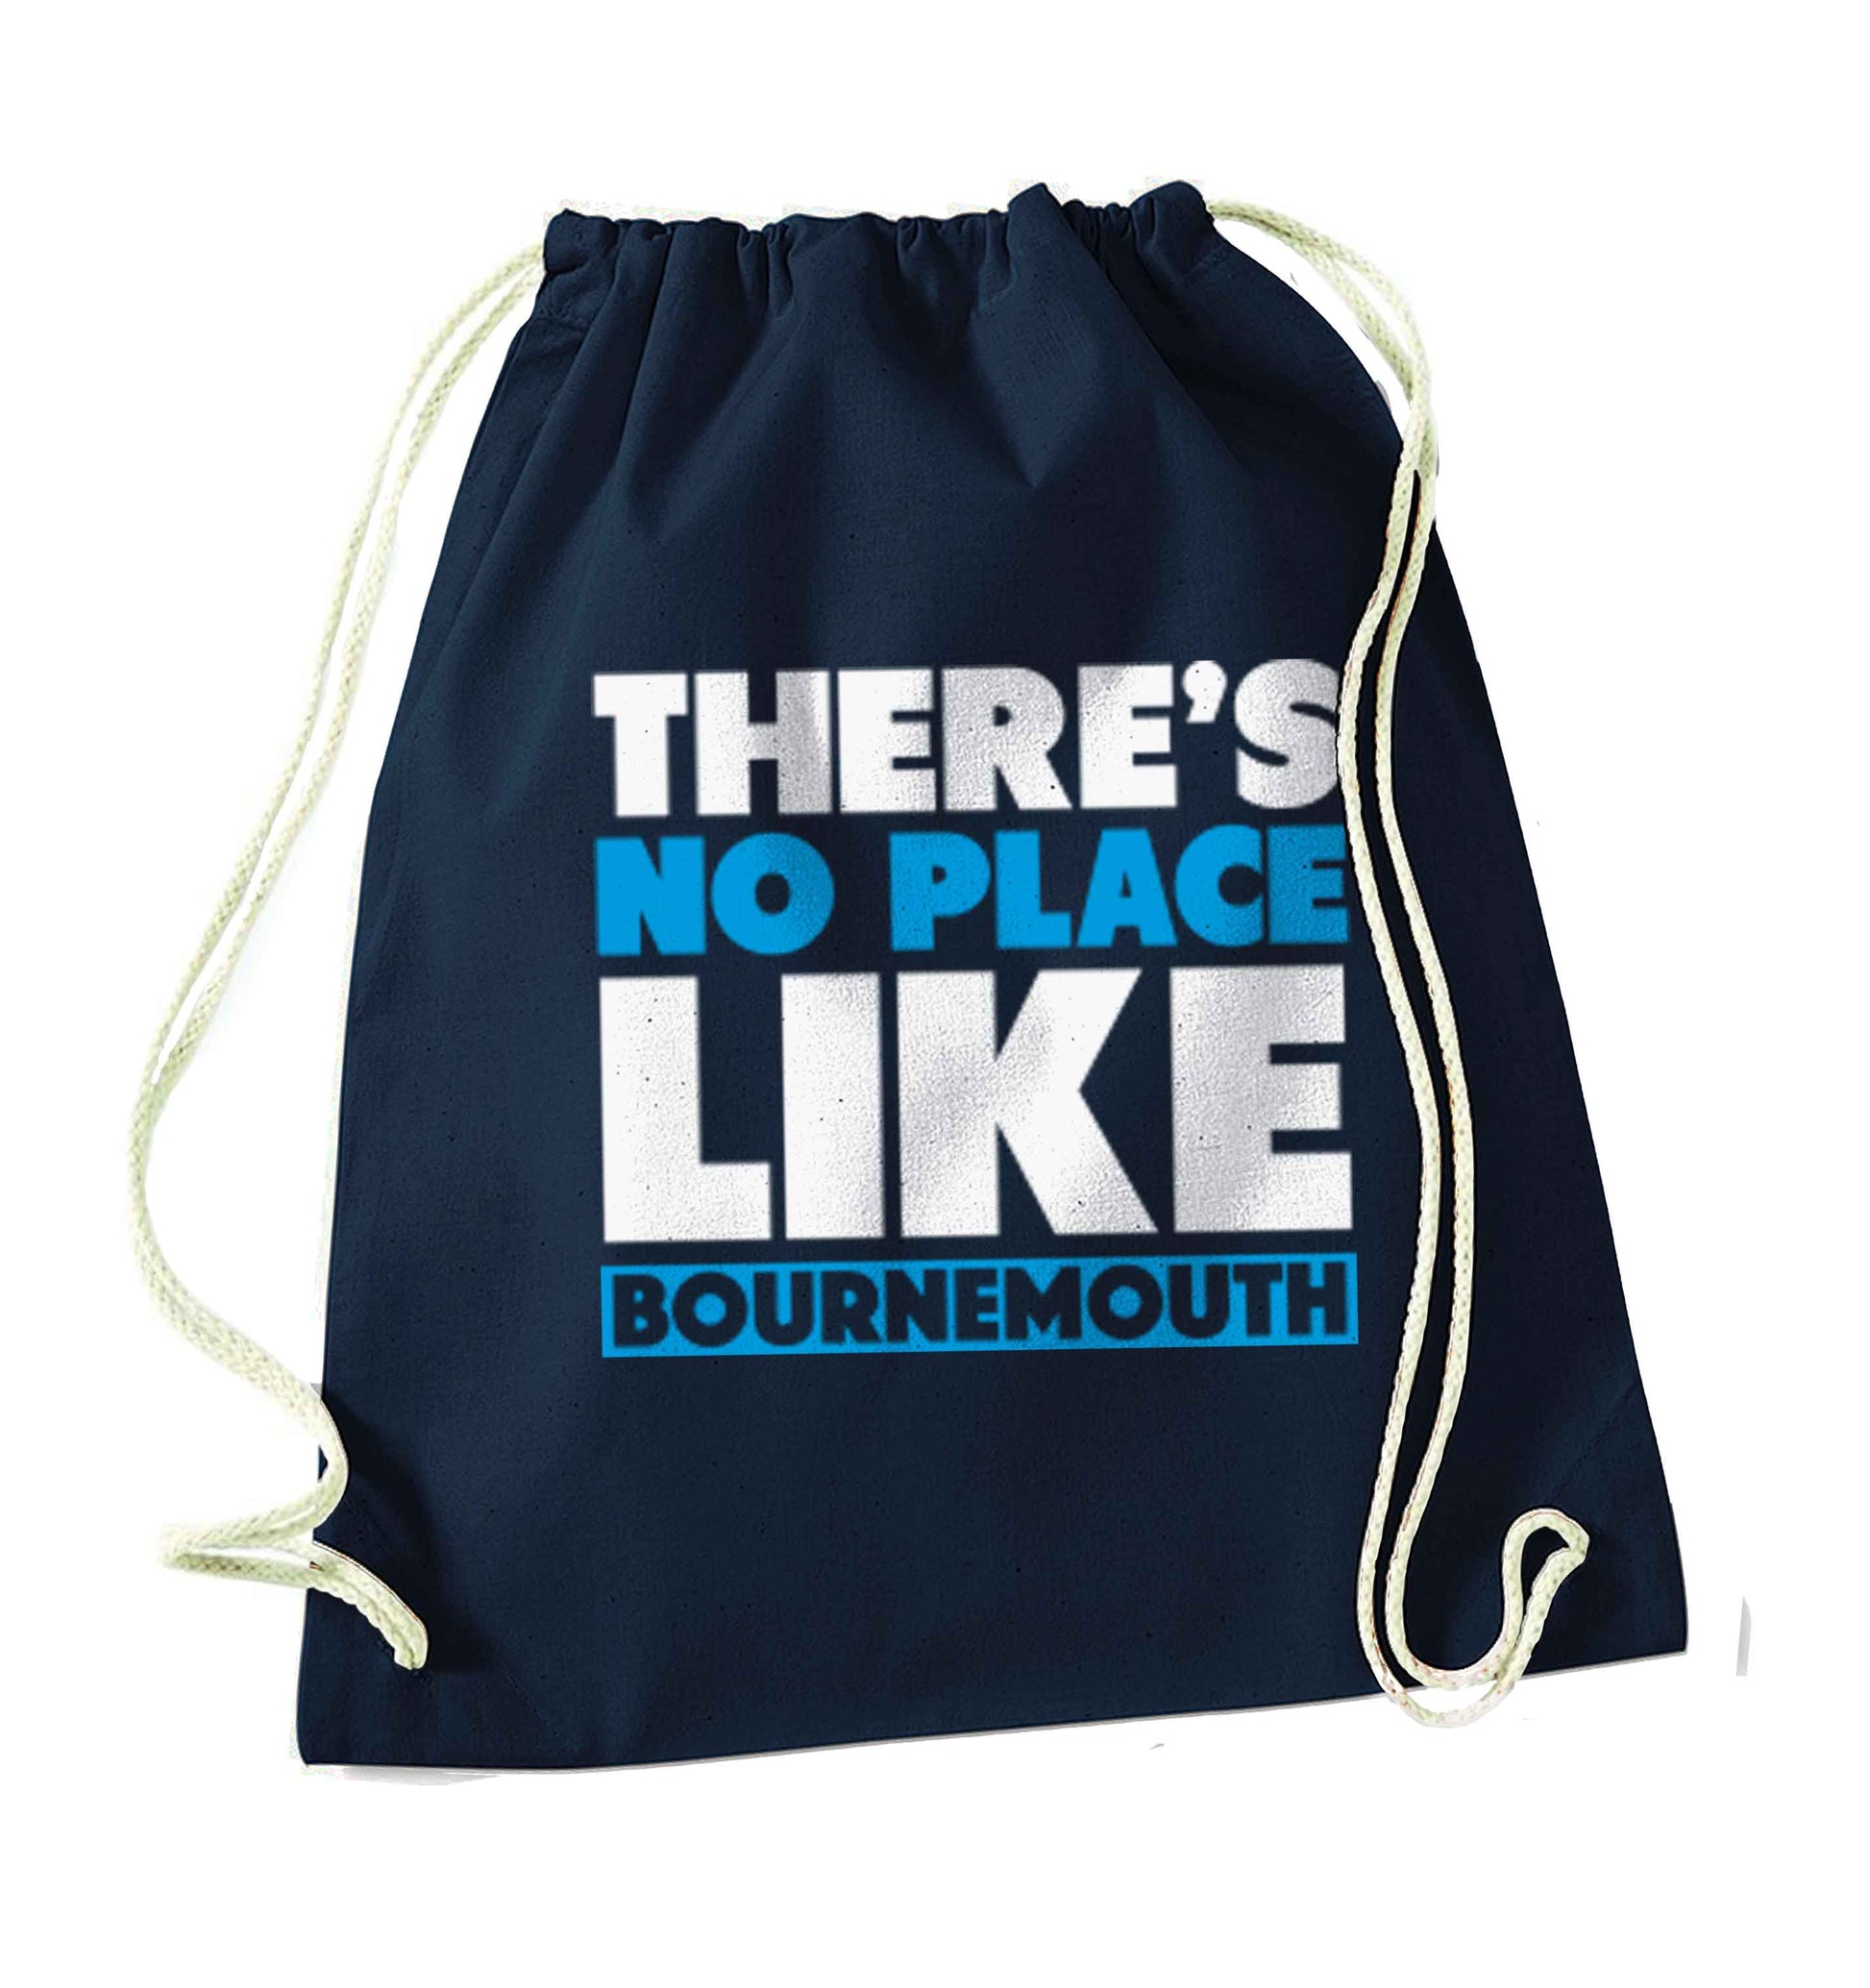 There's no place like Bournemouth navy drawstring bag